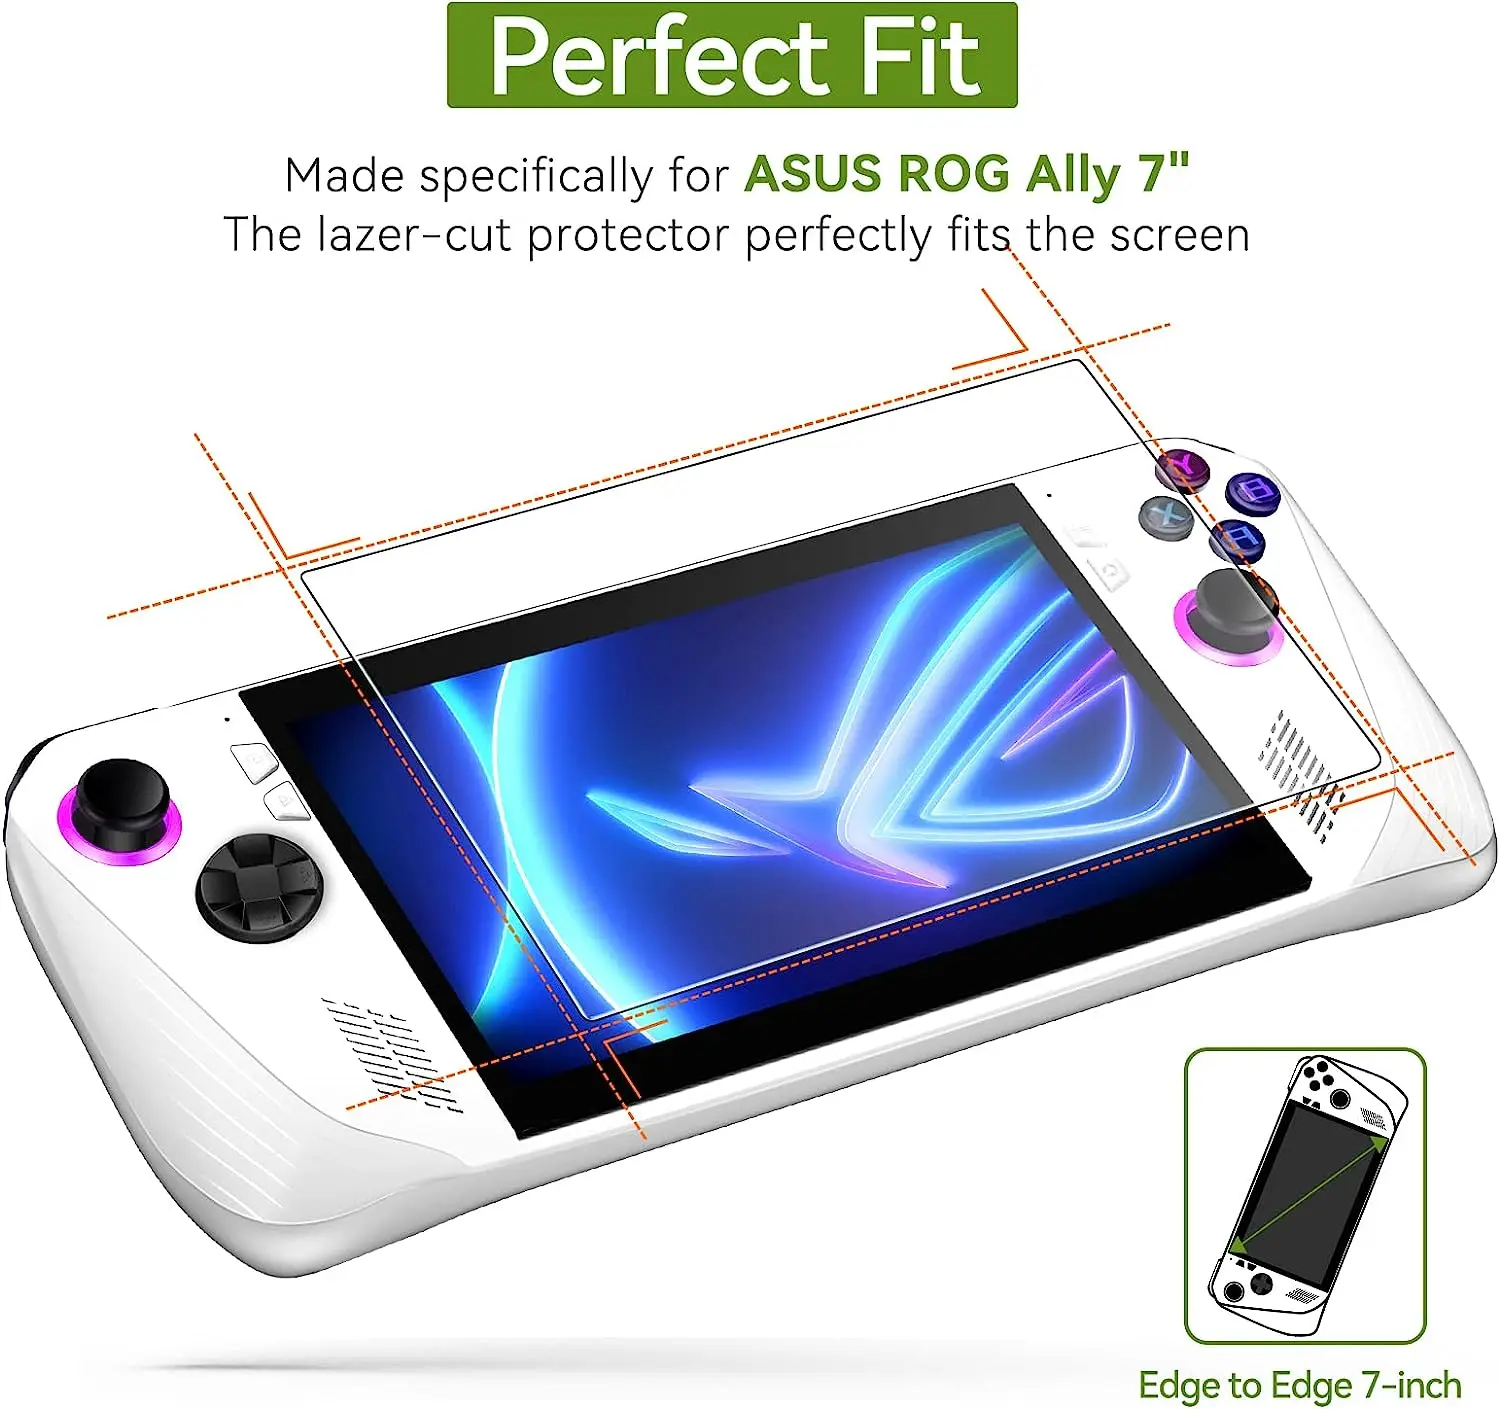 Protective Case for Asus ROG ALLY Consoles Shockproof Protector